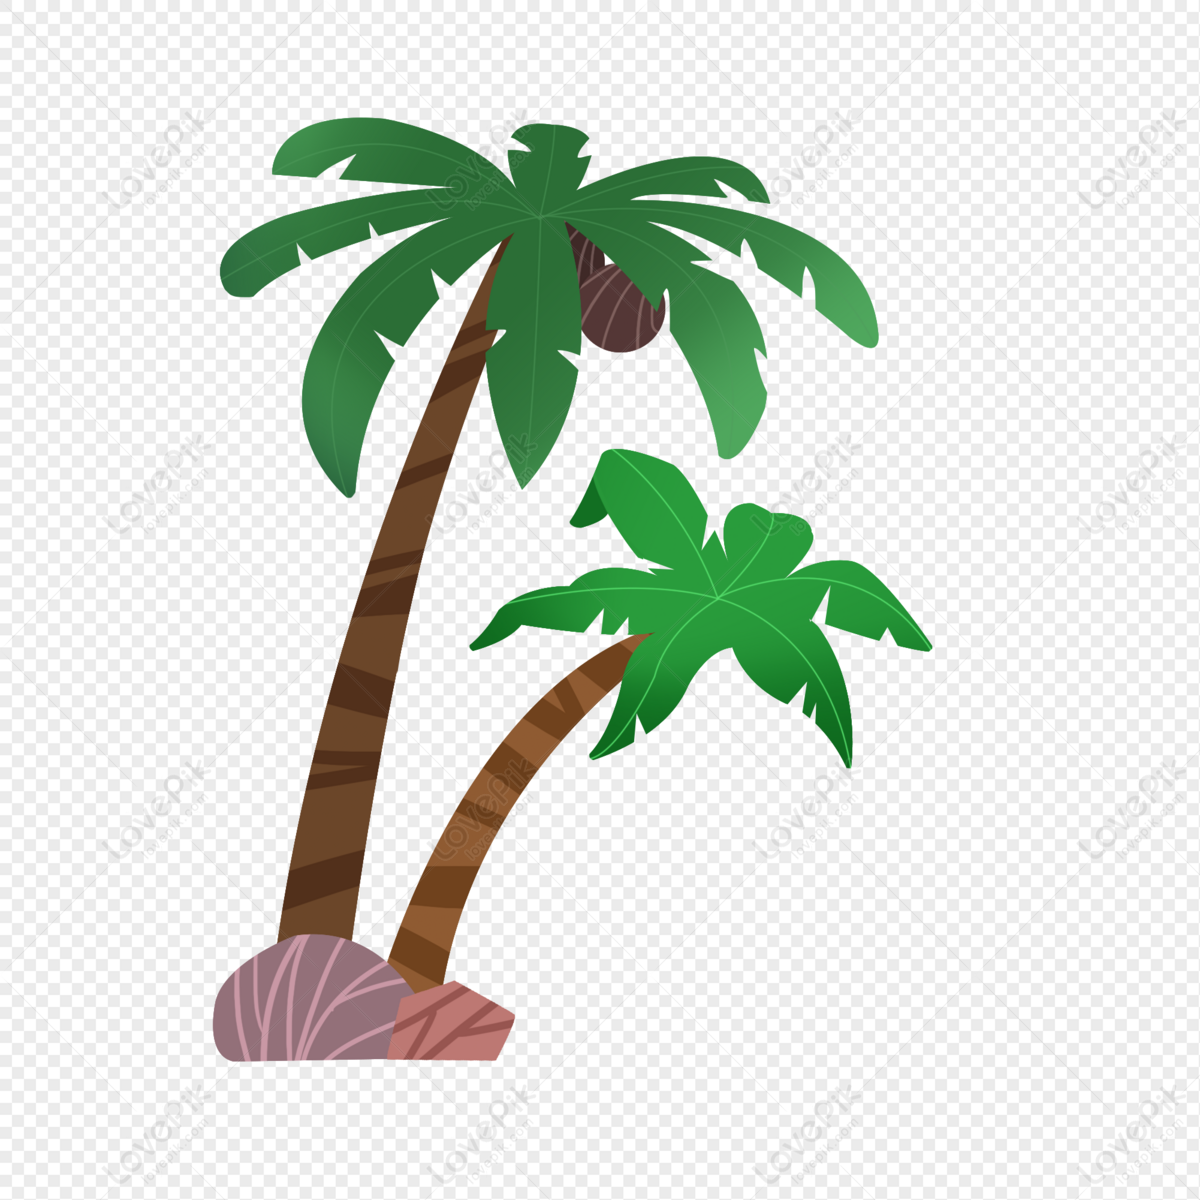 Coconut Tree Cartoon Element PNG Free Download And Clipart Image For Free  Download - Lovepik | 401747903